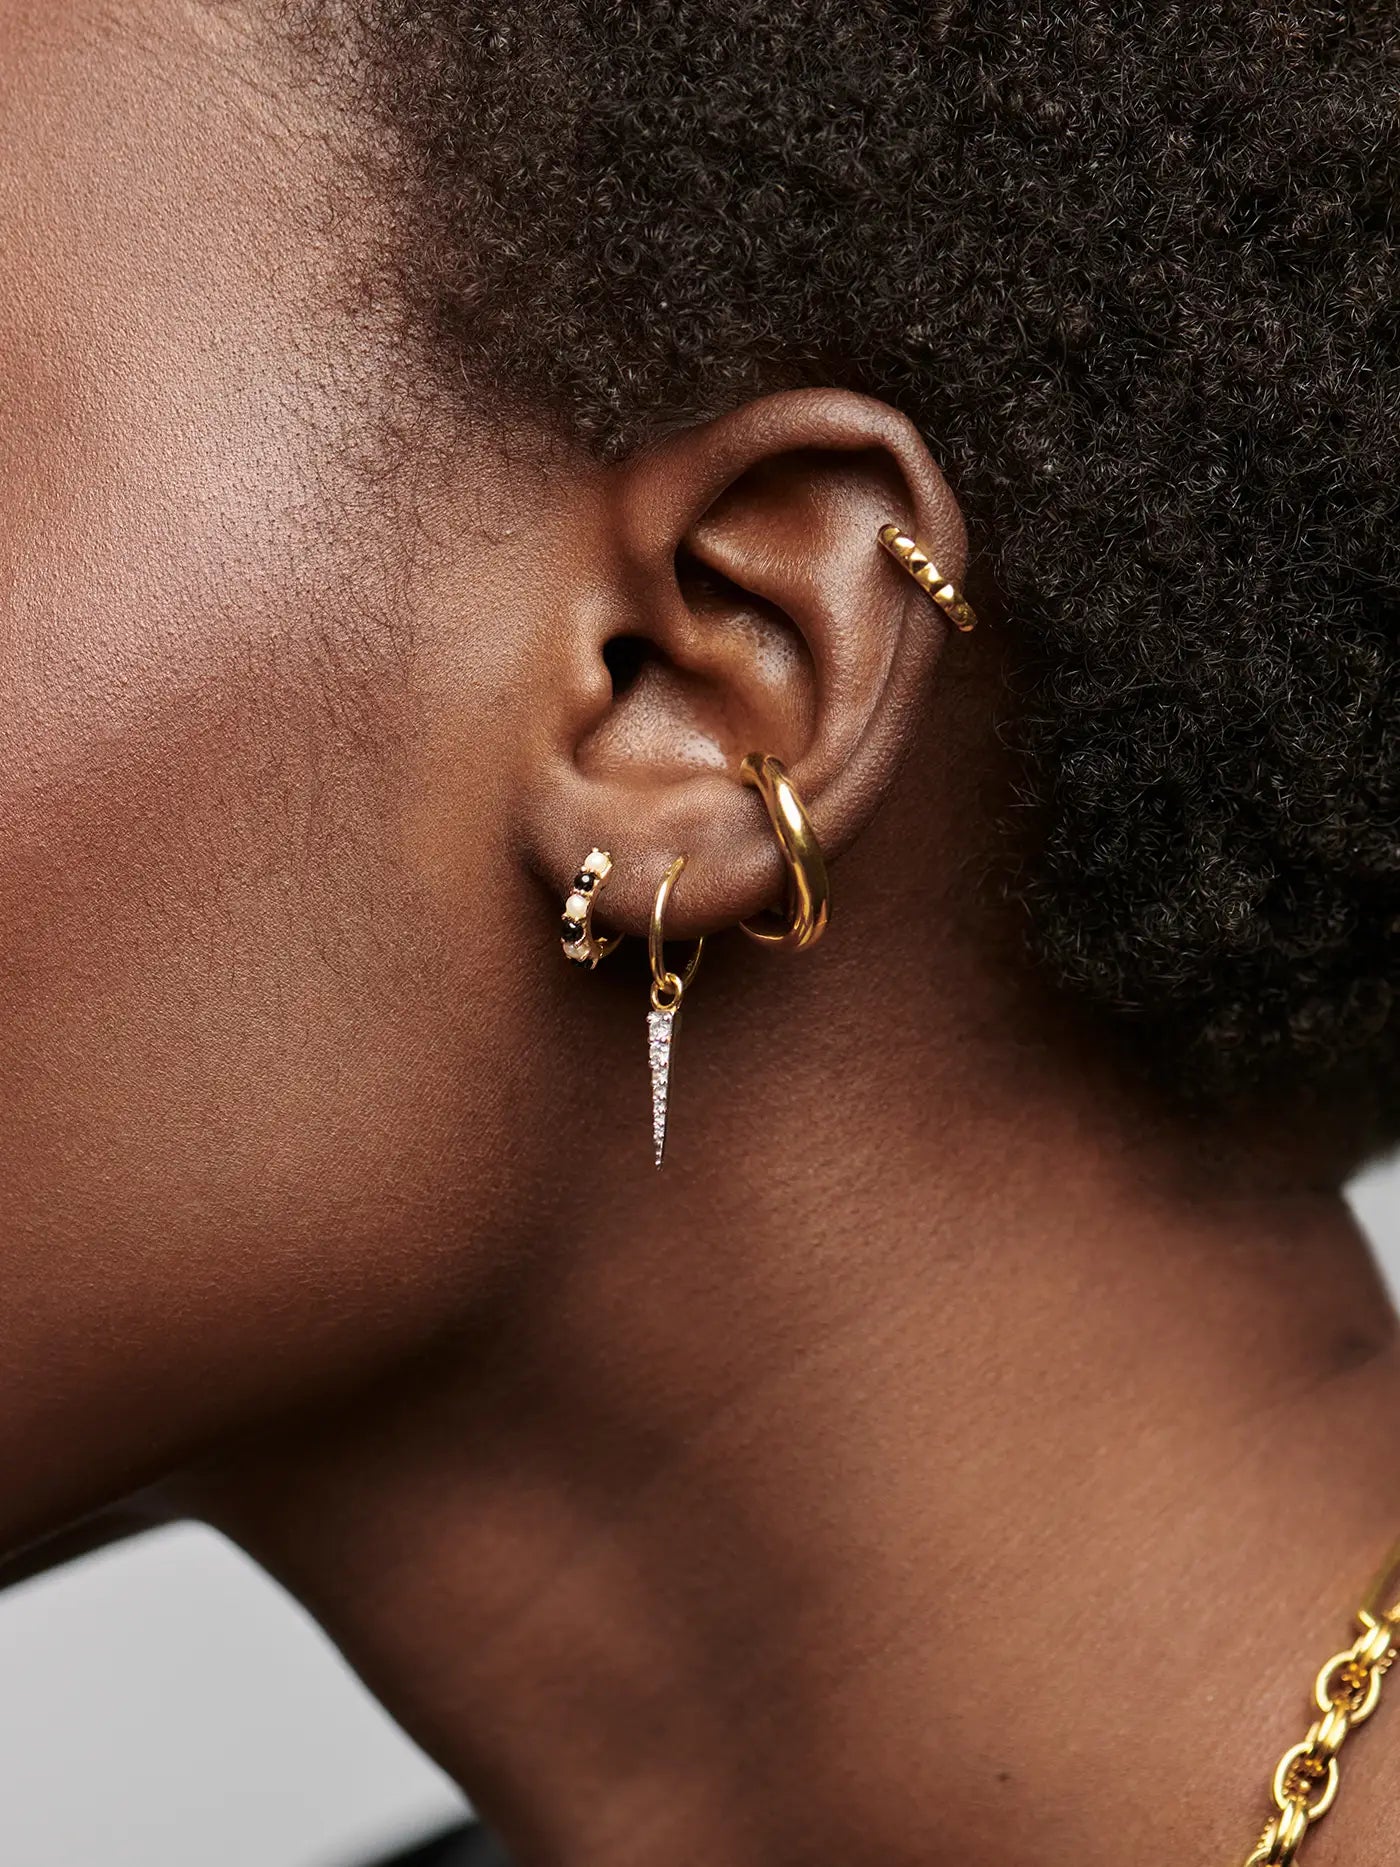 Seeing Double Spiral Hoop Earrings in Gold | Uncommon James